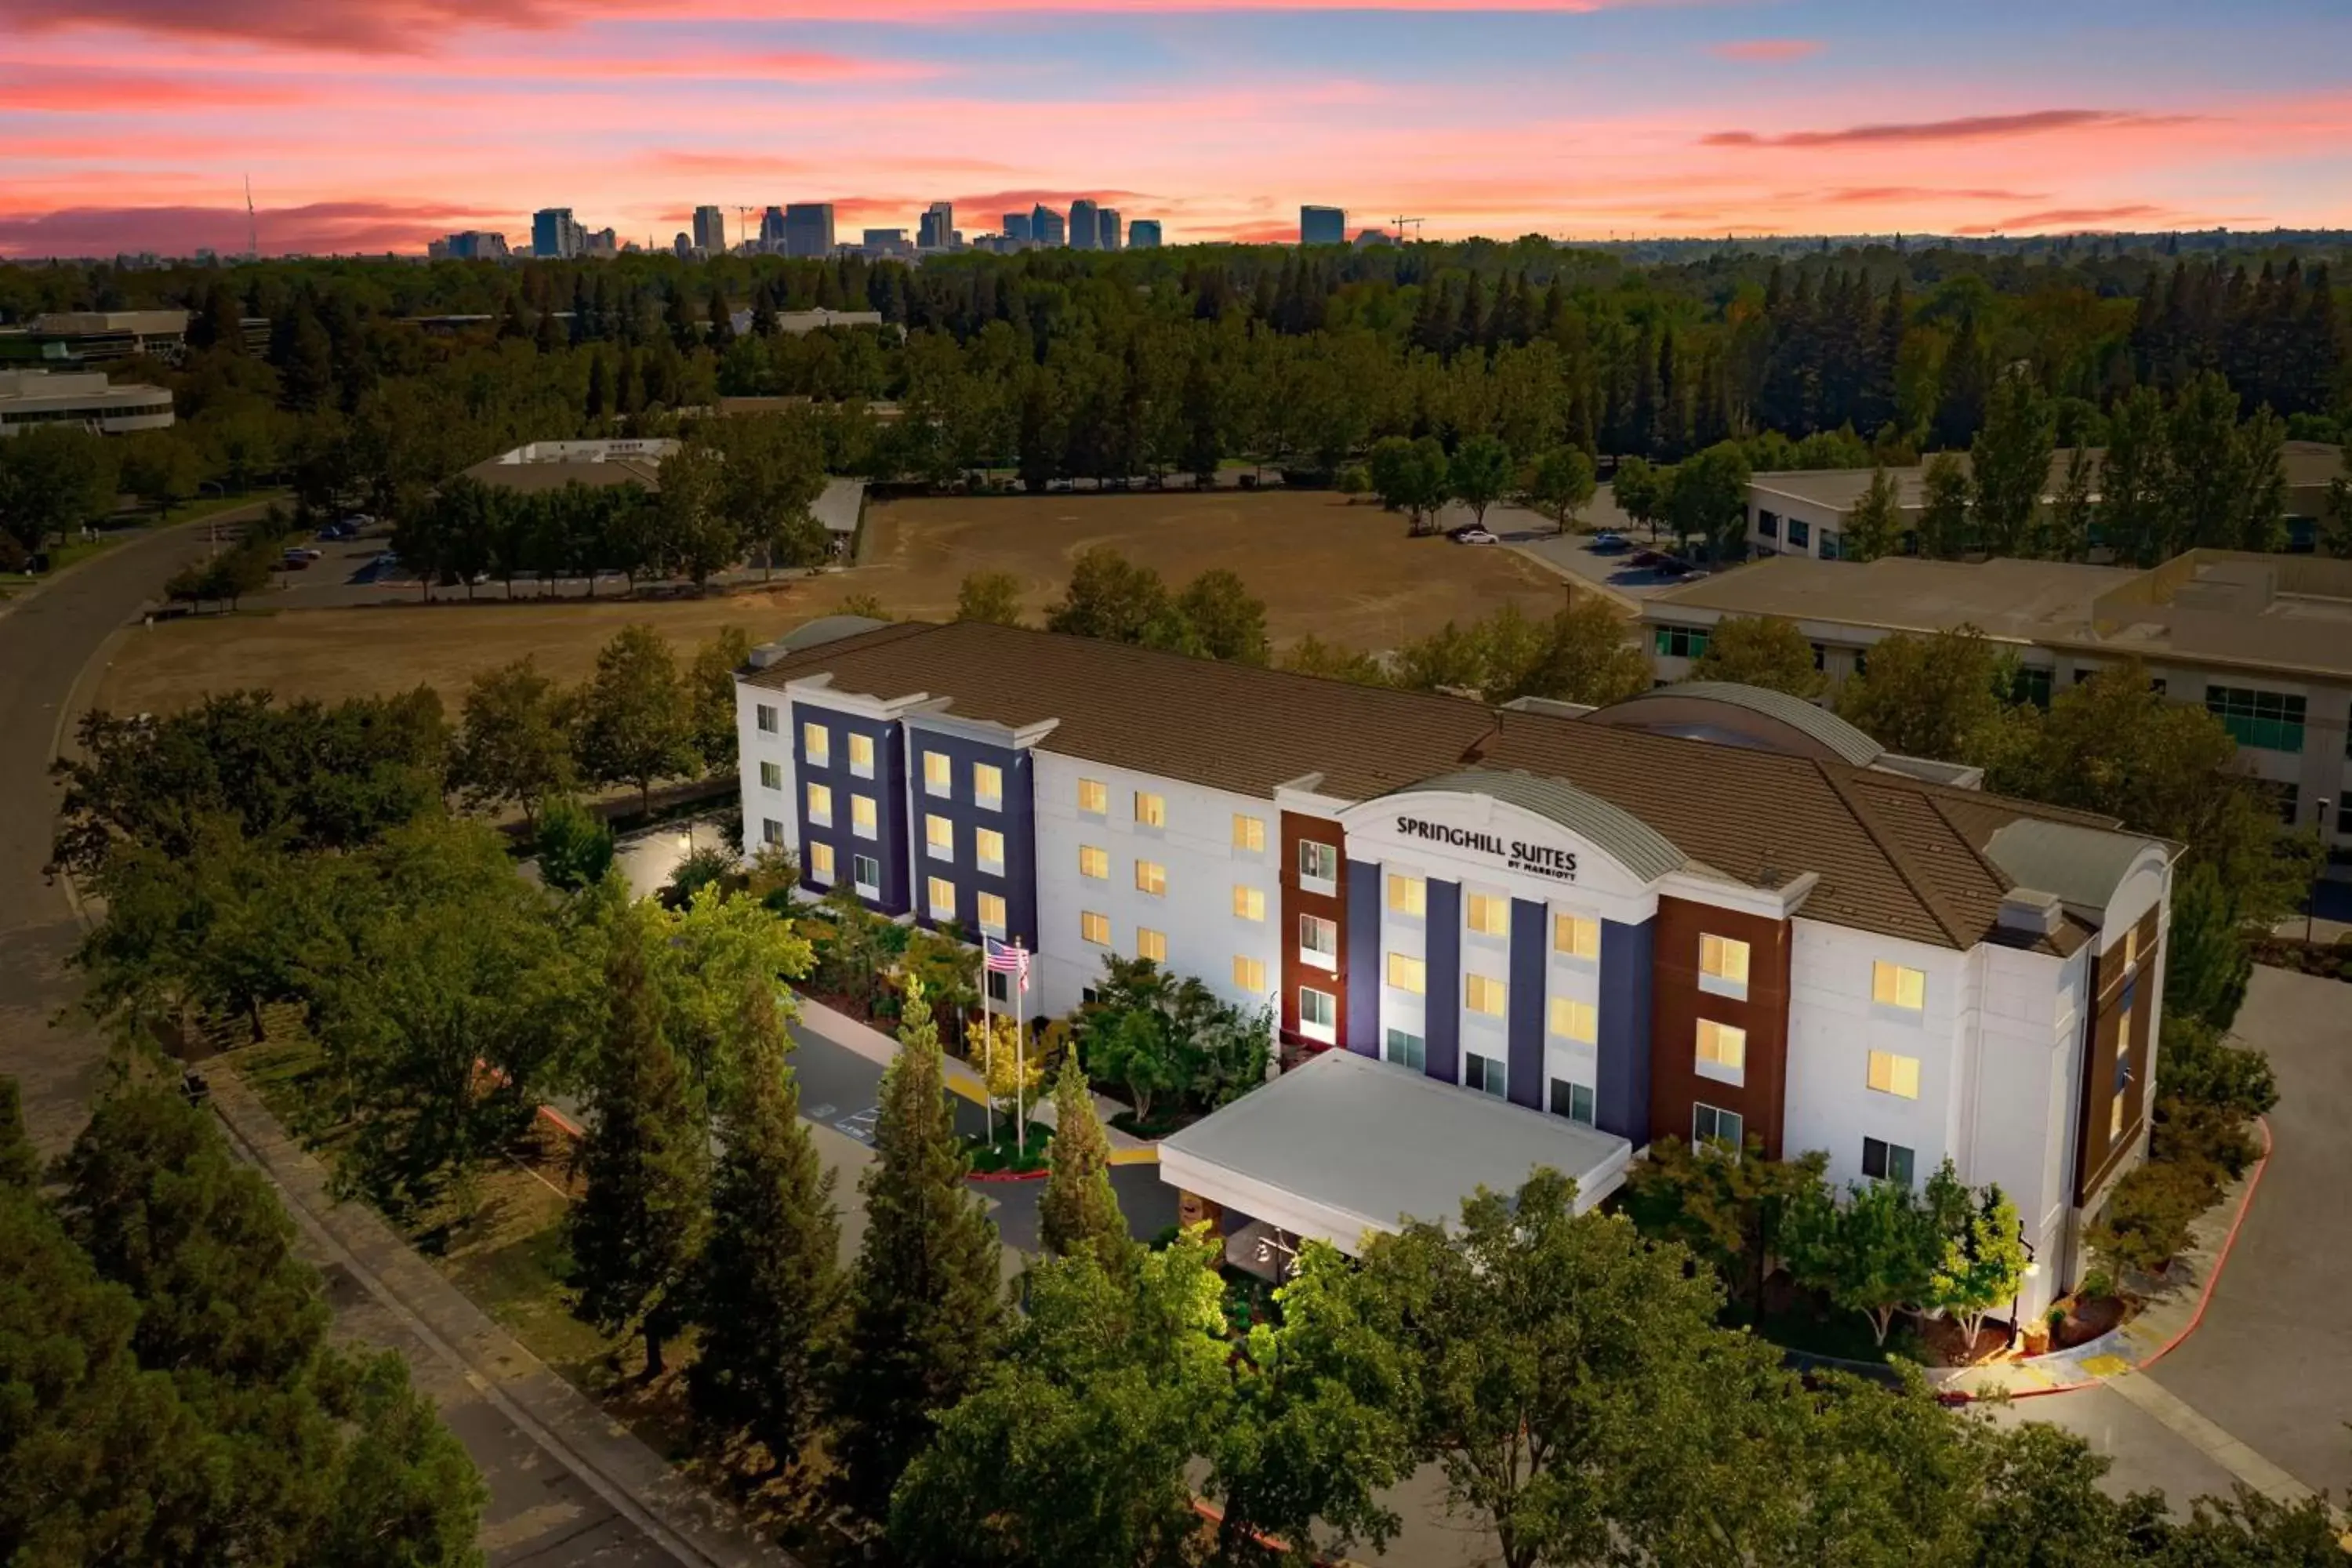 Property building, Bird's-eye View in SpringHill Suites by Marriott Sacramento Natomas